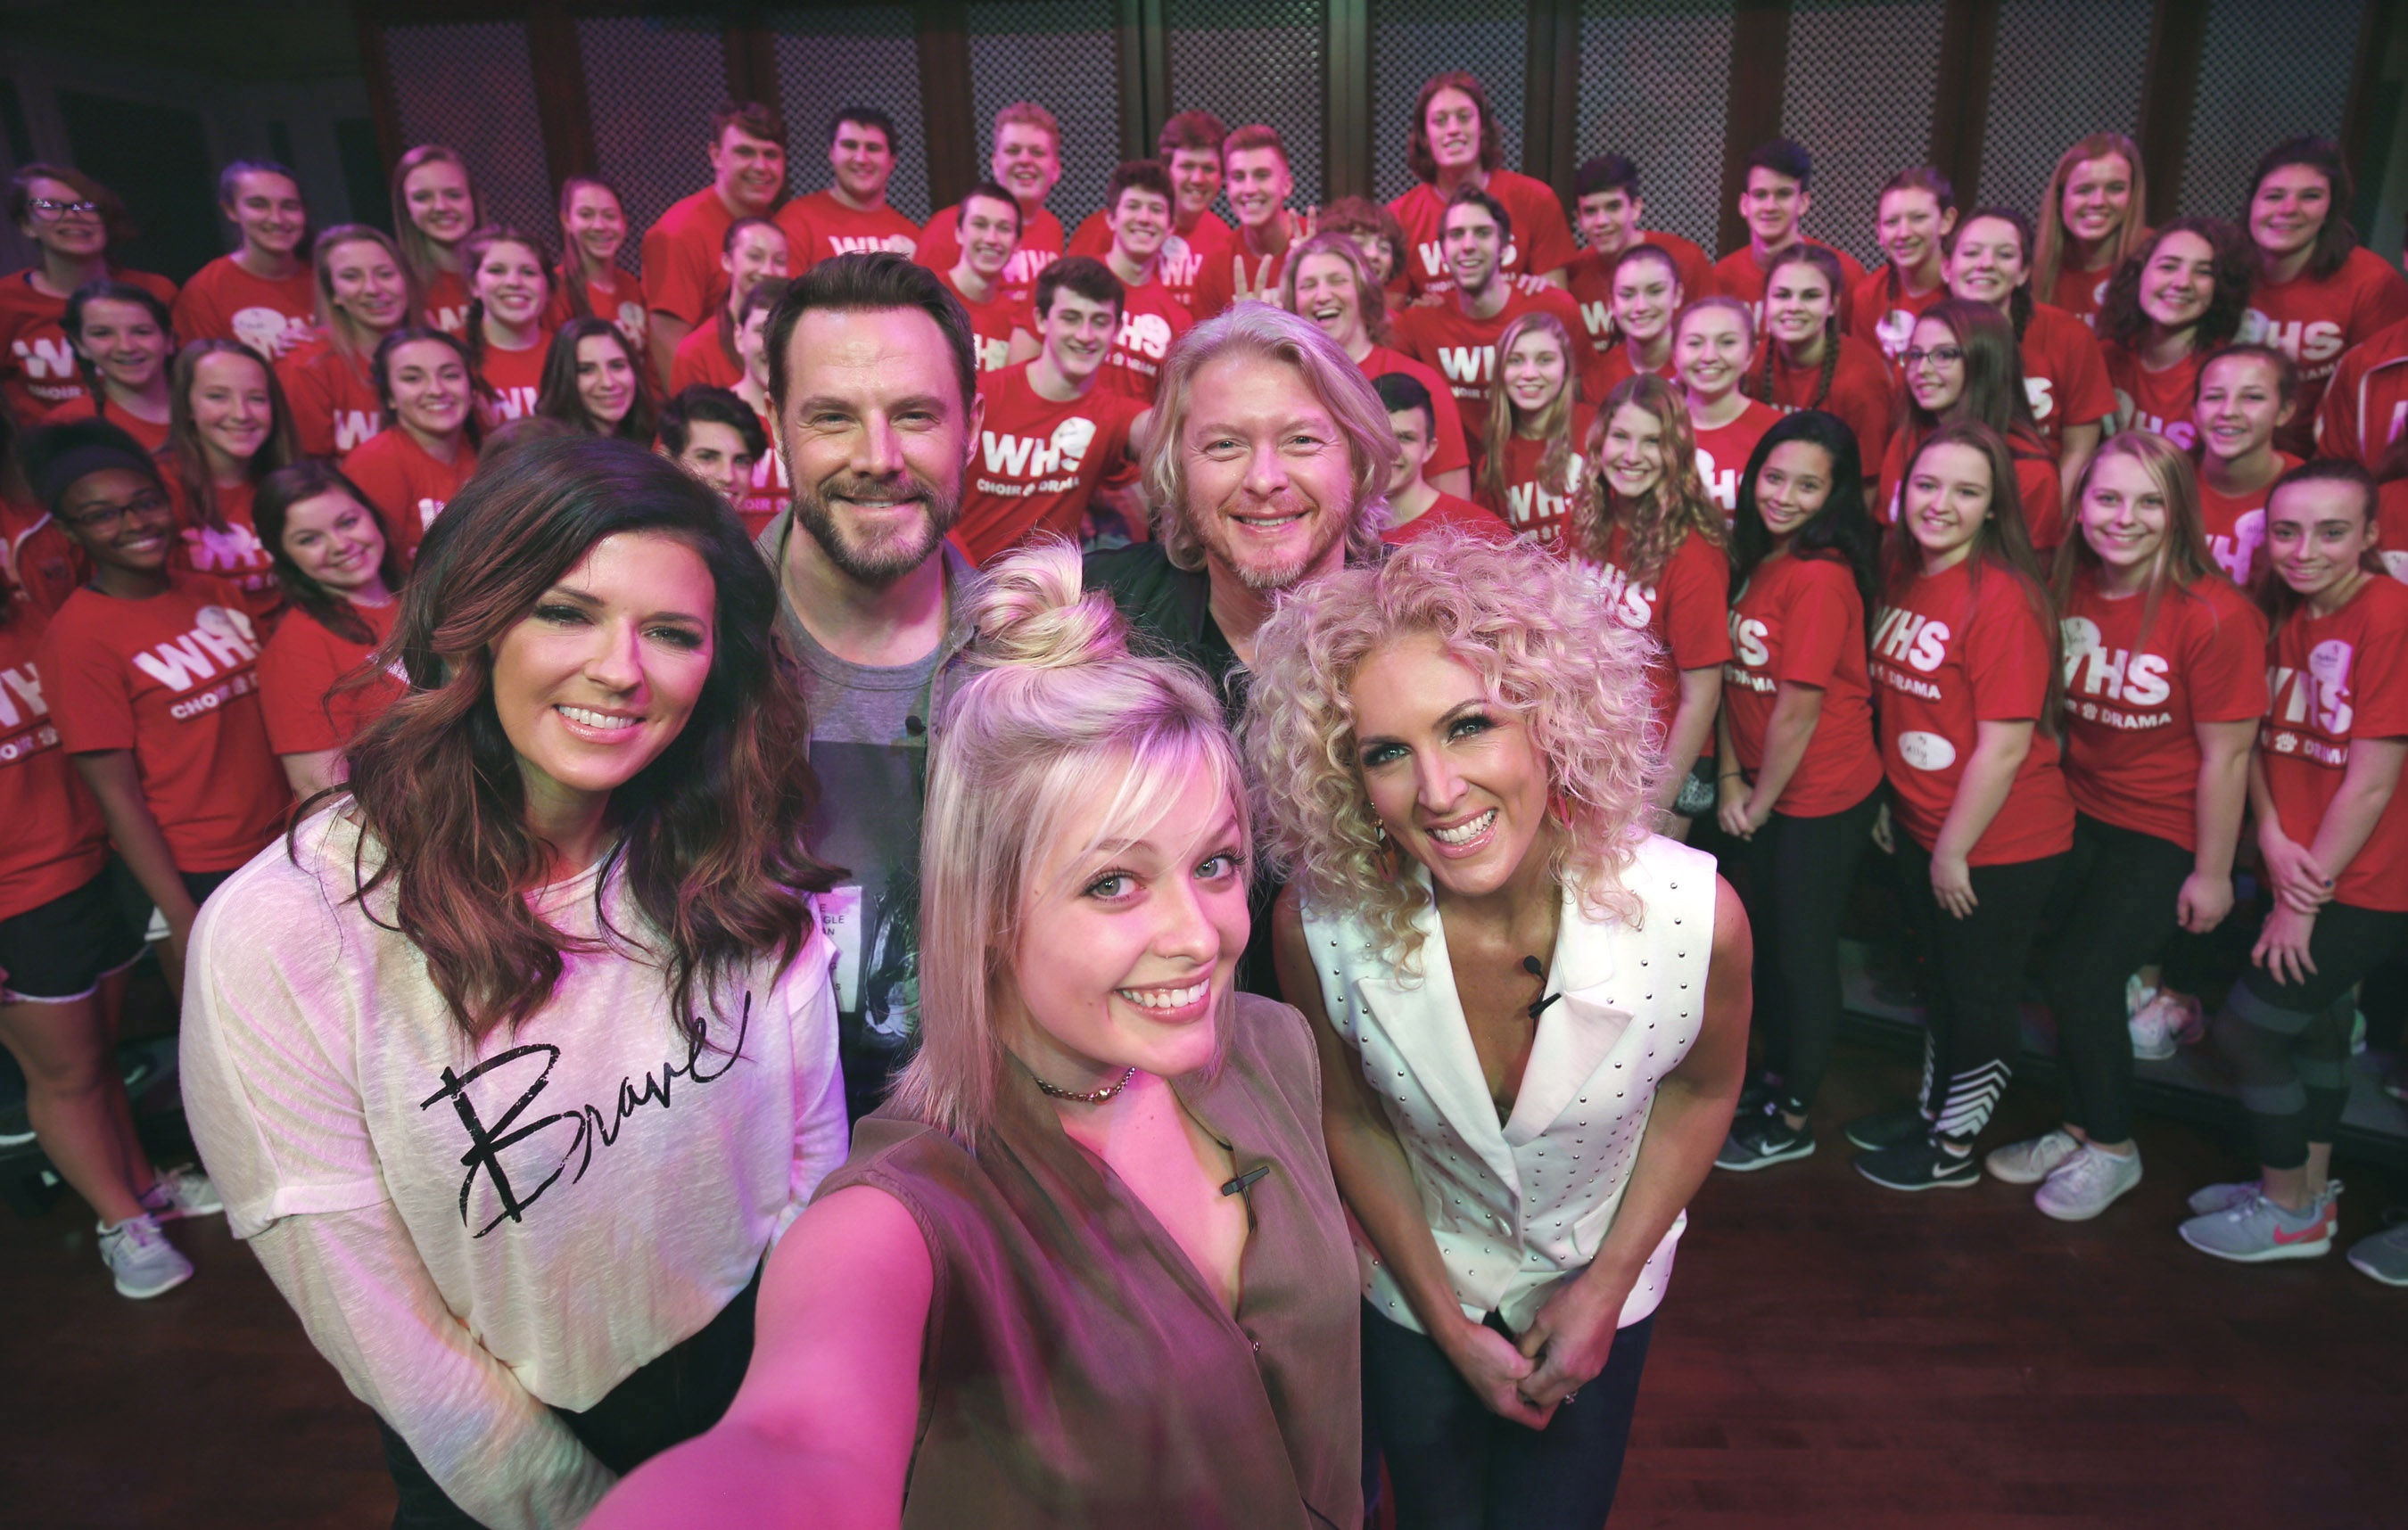 Little Big Town Selfie with Ohio Student Choir Group